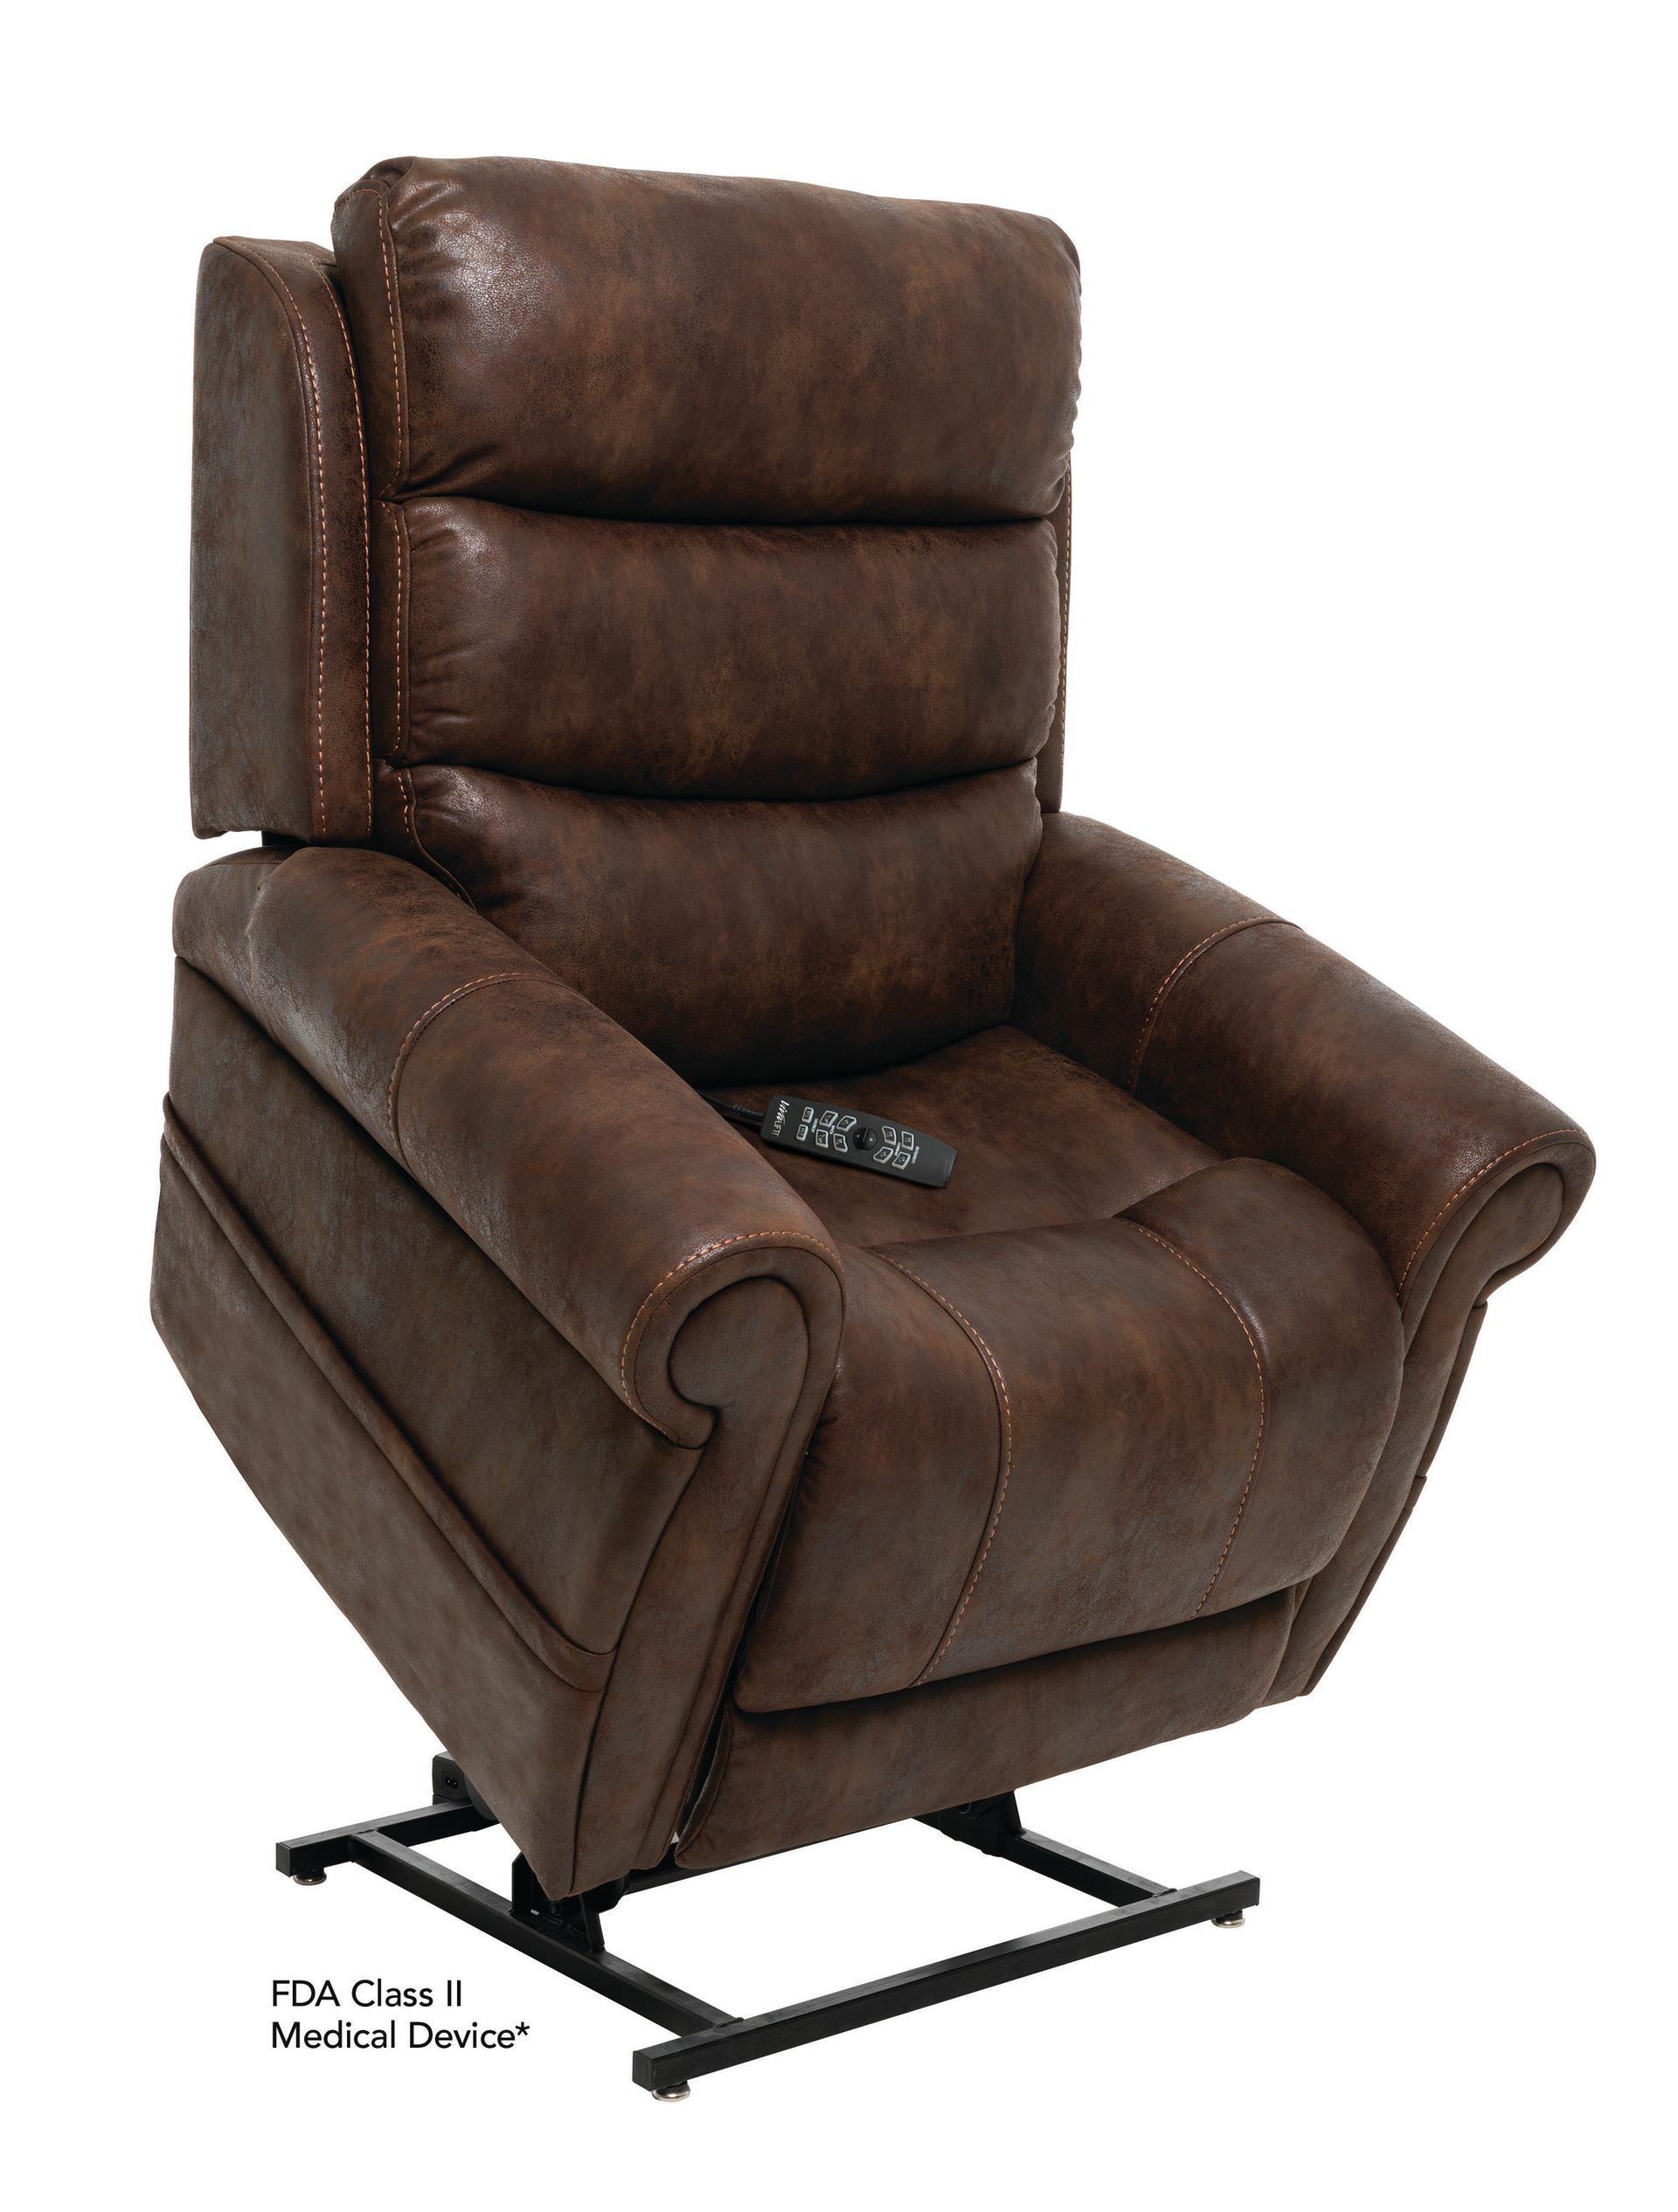 3-position full recline ideal for napping and relaxing, standard large dual pockets, easy-to-use hand control. energy-efficient transformer, features self-diagnostic electronics, quiet and smooth lift system.